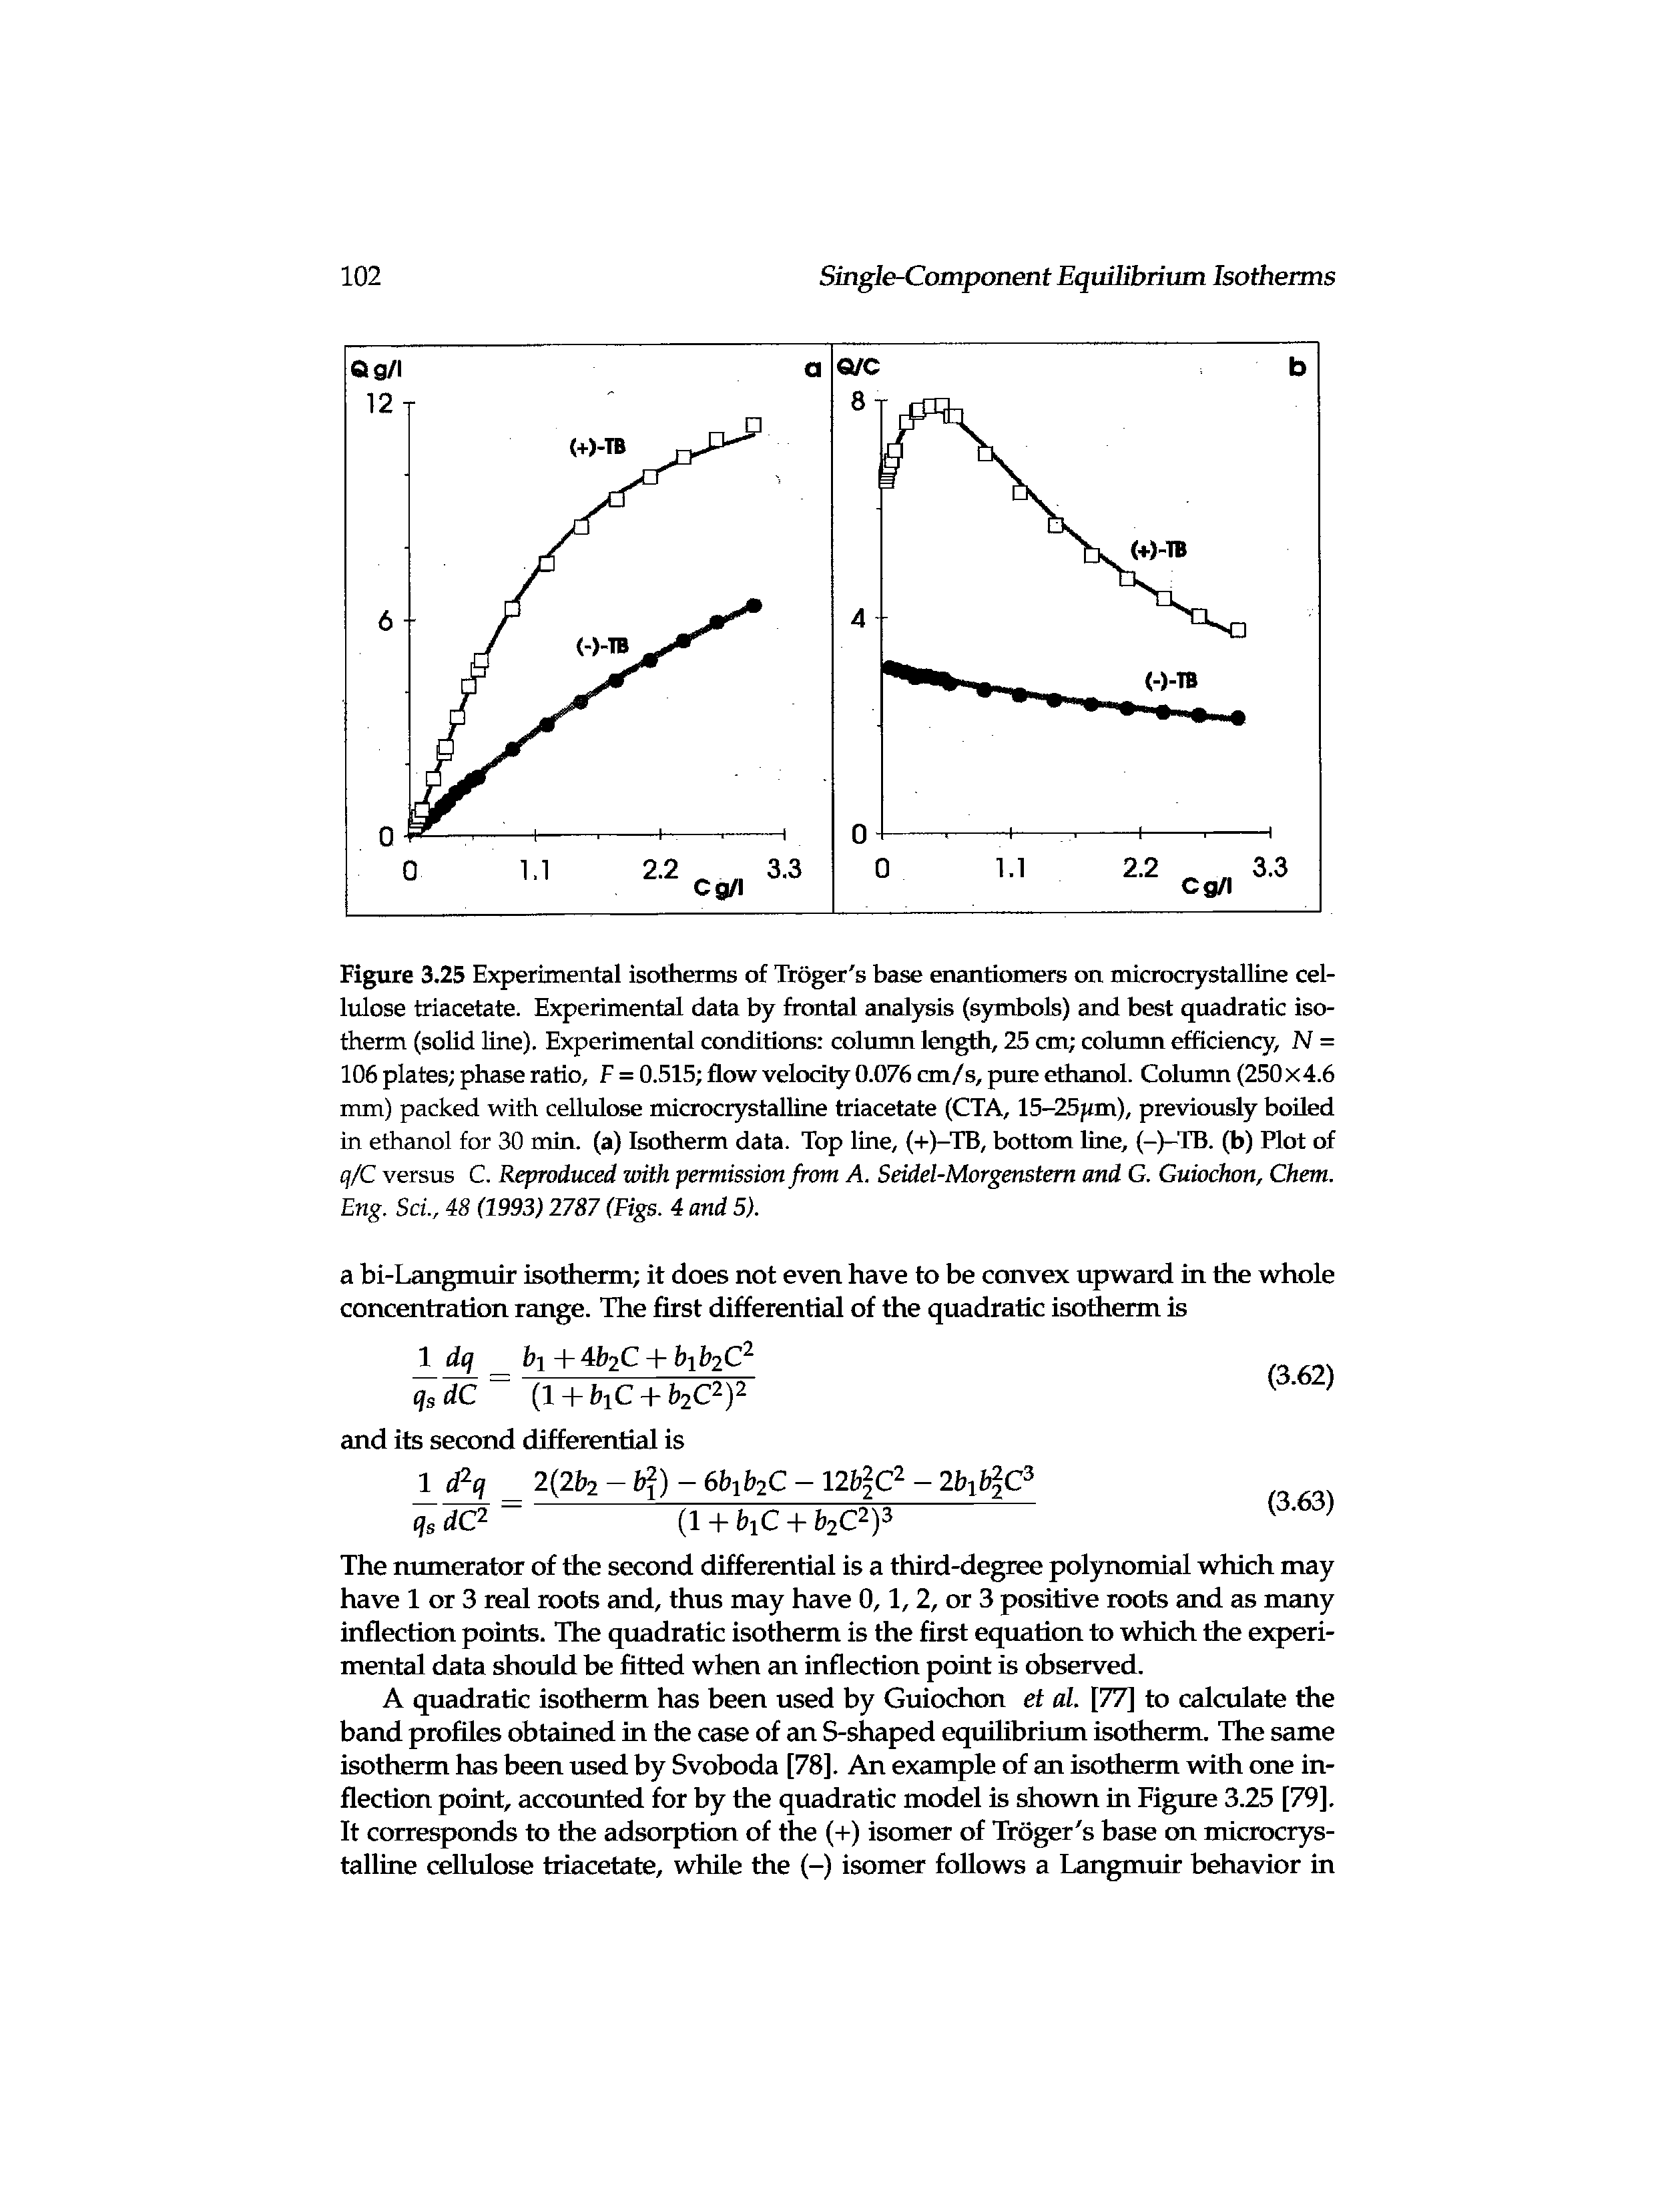 Figure 3.25 Experimental isotherms of Troger s base enantiomers on microcrystalline cellulose triacetate. Experimental data by frontal analysis (symbols) and best quadratic isotherm (solid line). Experimental conditions column length, 25 cm column efficiency, N = 106 plates phase ratio, F = 0.515 flow velocity 0.076 cm/s, pure ethanol. Column (250 x4.6 mm) packed with cellulose microcrystalUne triacetate (CTA, 15-25ftm), previously boiled in ethanol for 30 min. (a) Isotherm data. Top line, (+)-TB, bottom line, (-)-TB. (b) Plot of q/C versus C. Reproduced with permission from A. Seidel-Morgenstem and G. Guiochon, Chem. Eng. Scl, 48 (1993) 2787 (Figs. 4 and 5).